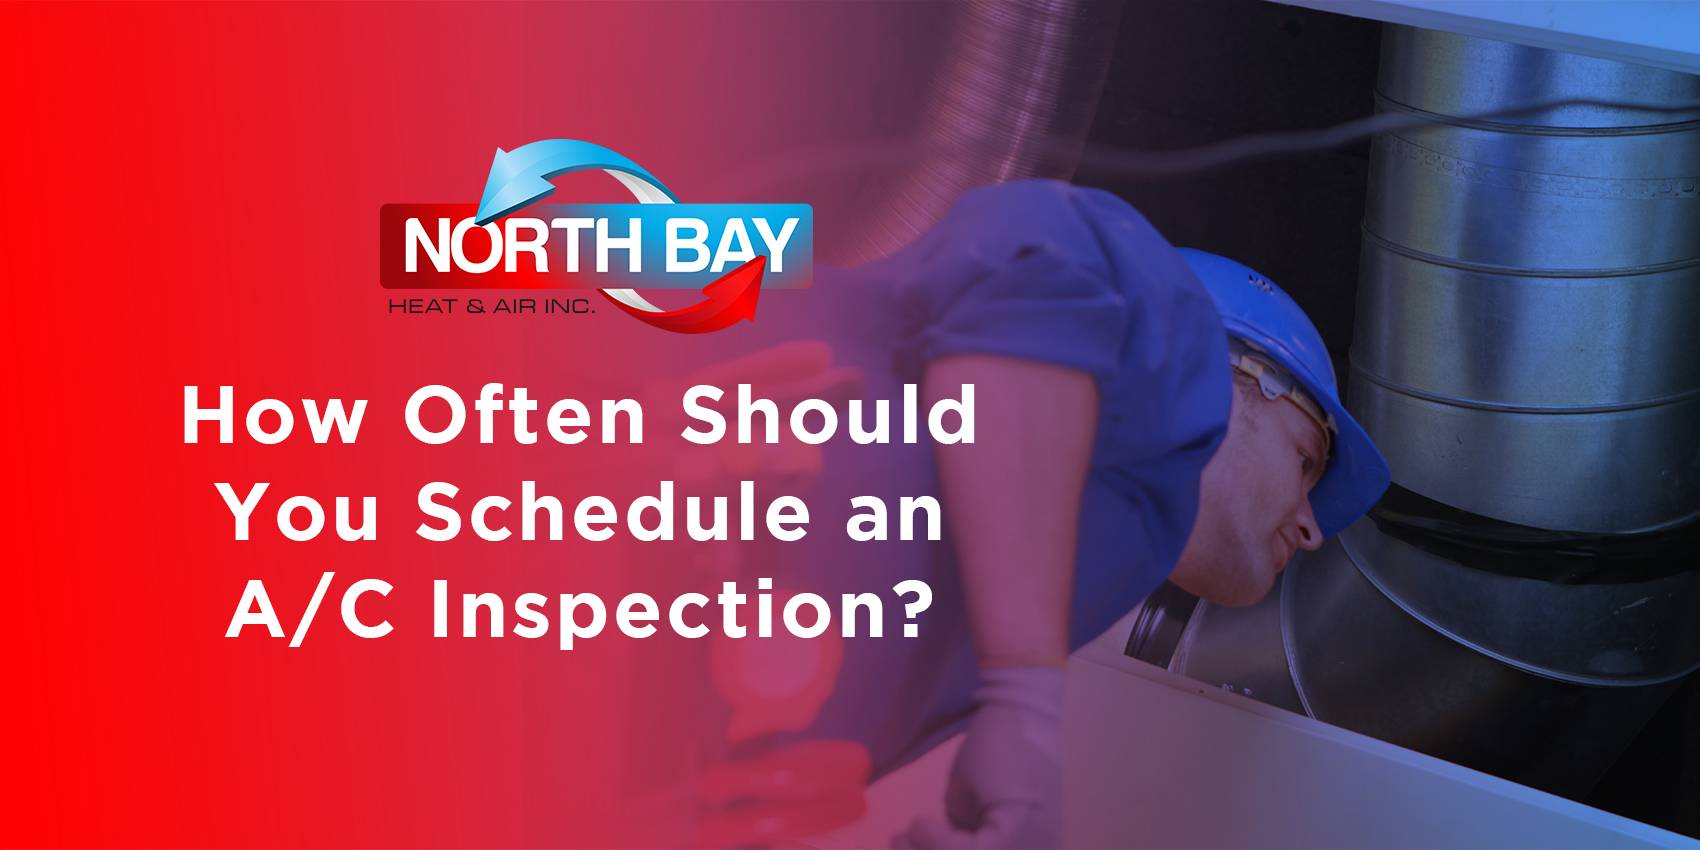 How Often Should You Schedule an A/C Inspection